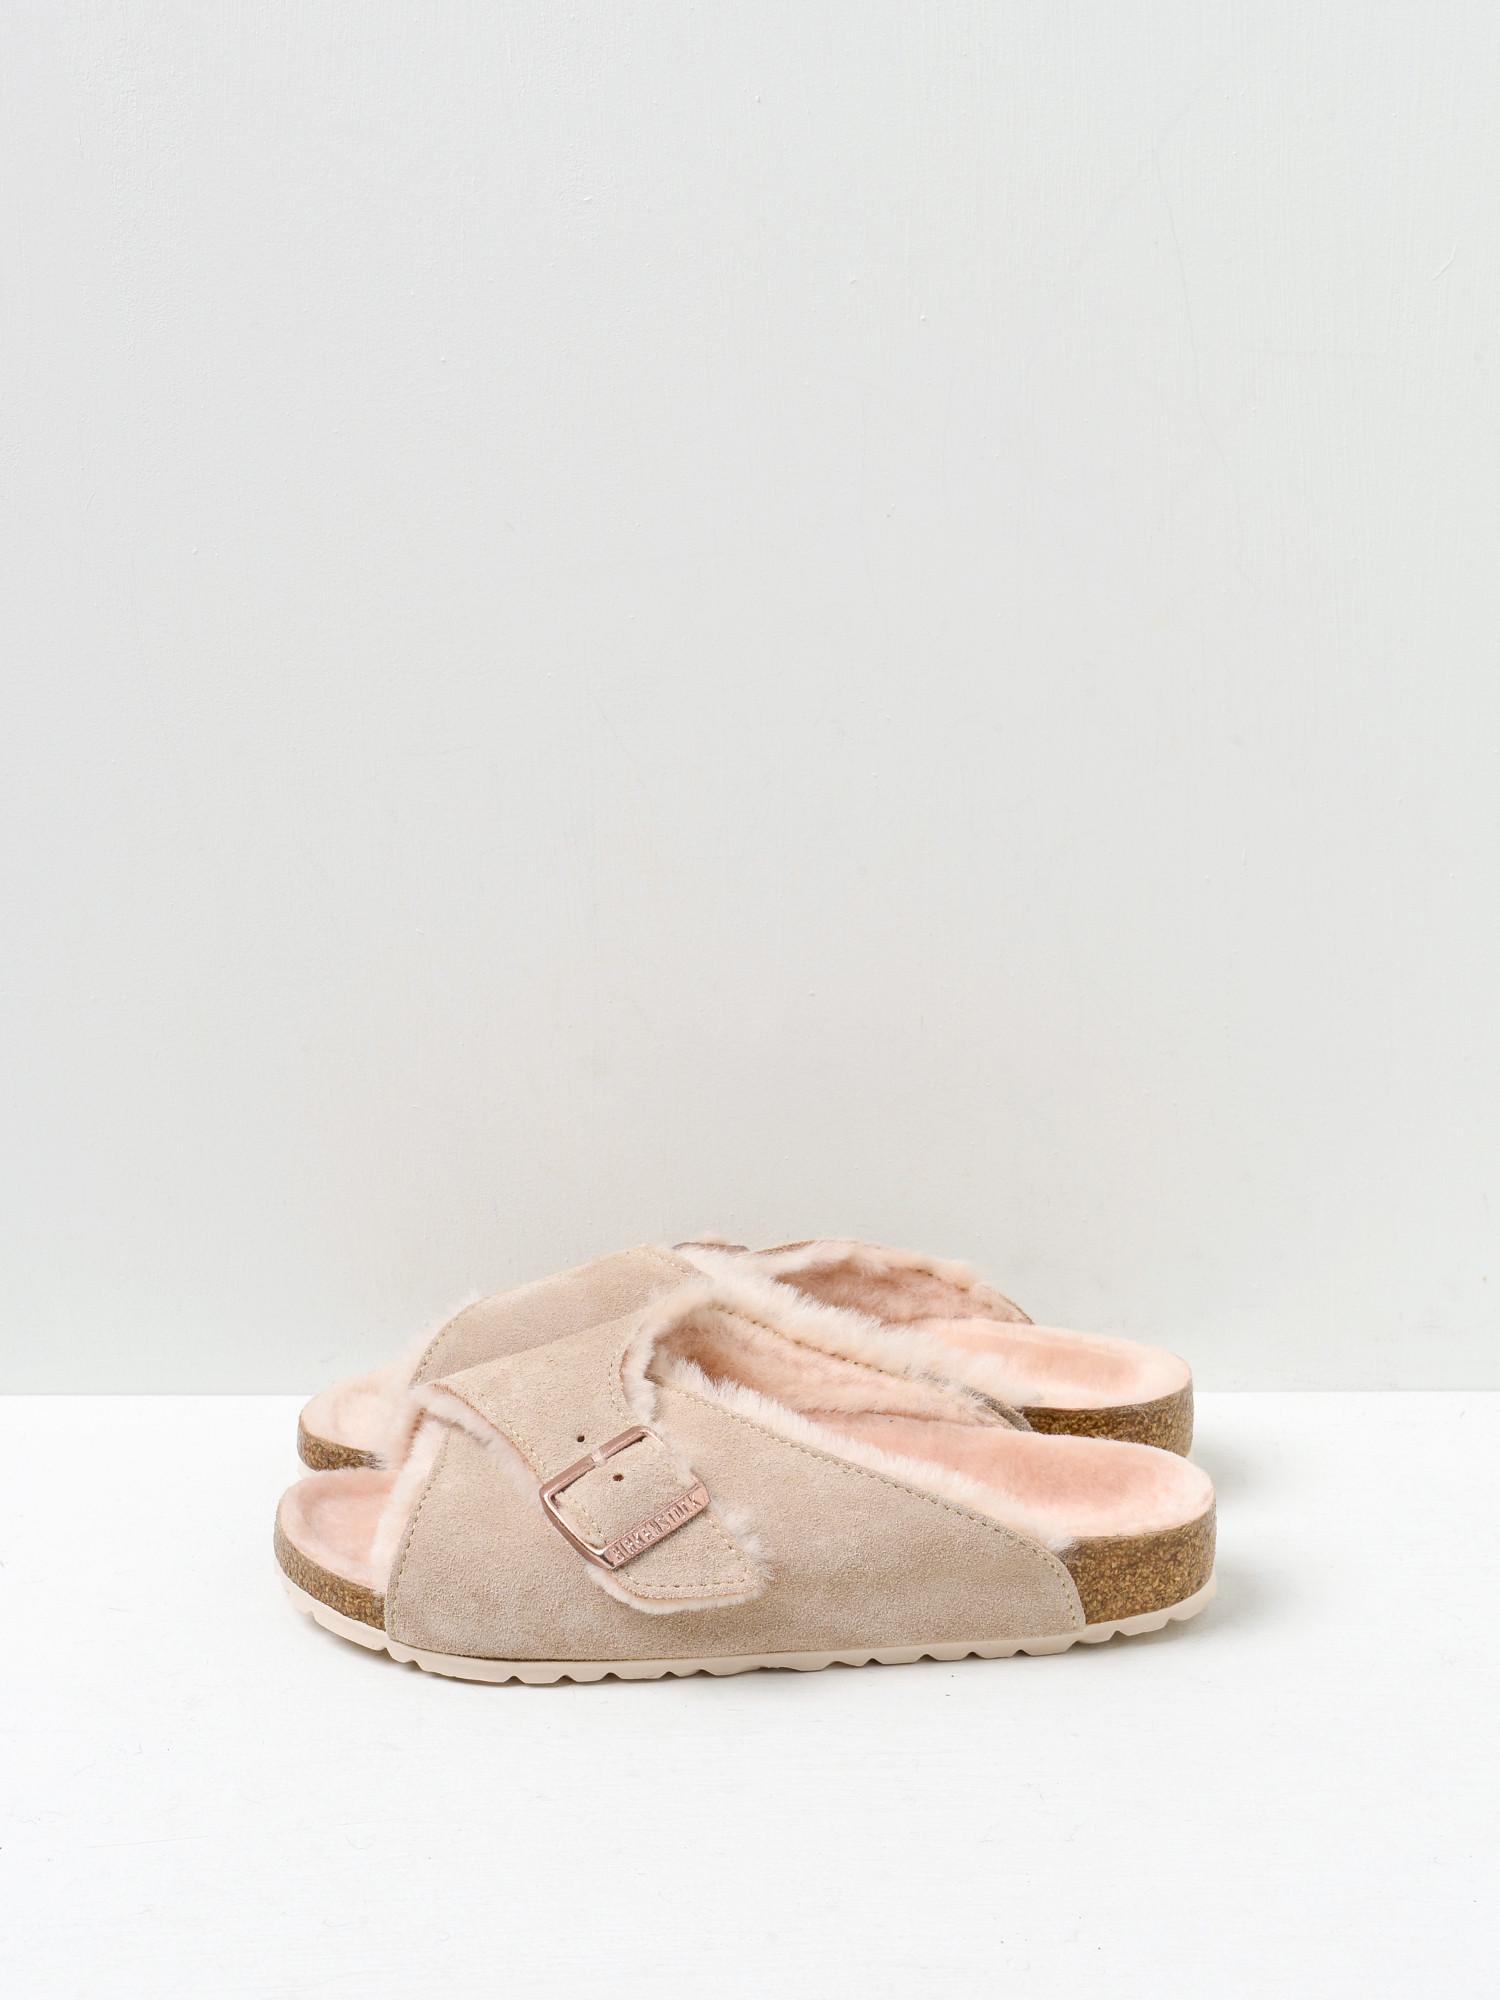 Birkenstock Leather Arosa Shearling Nude/nude in Natural | Lyst